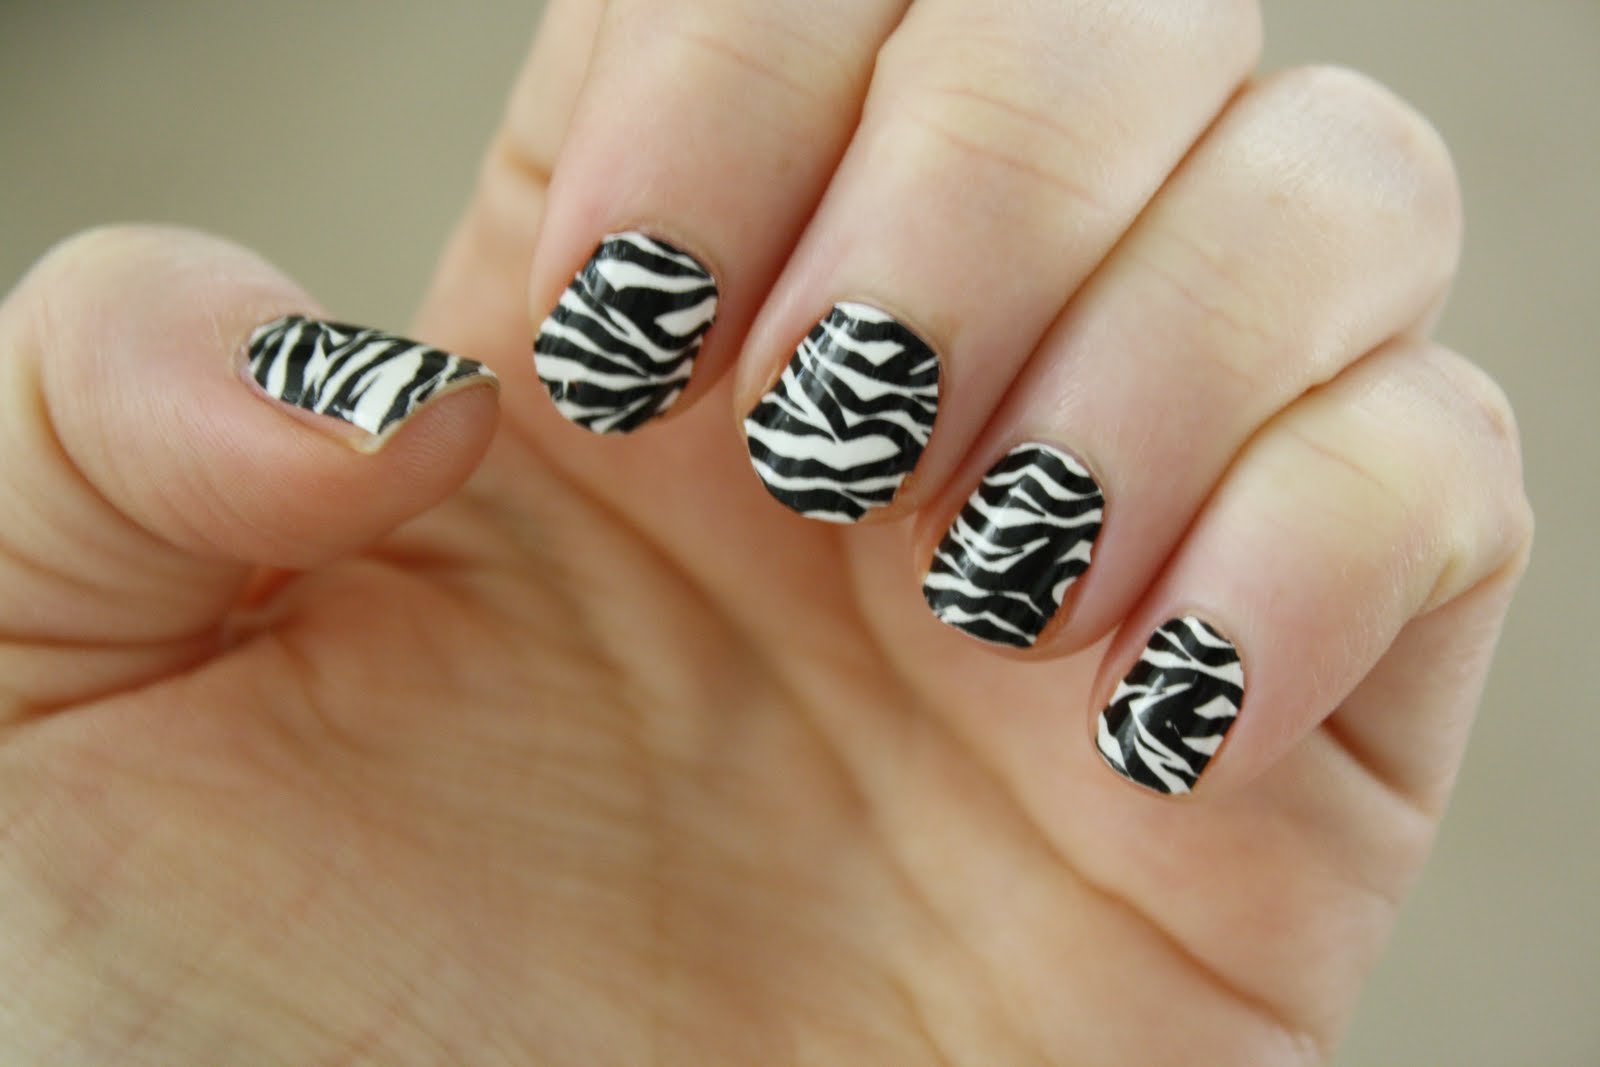 I tried out Sally Hansen Salon Effects Nail Polish Strips for the first time